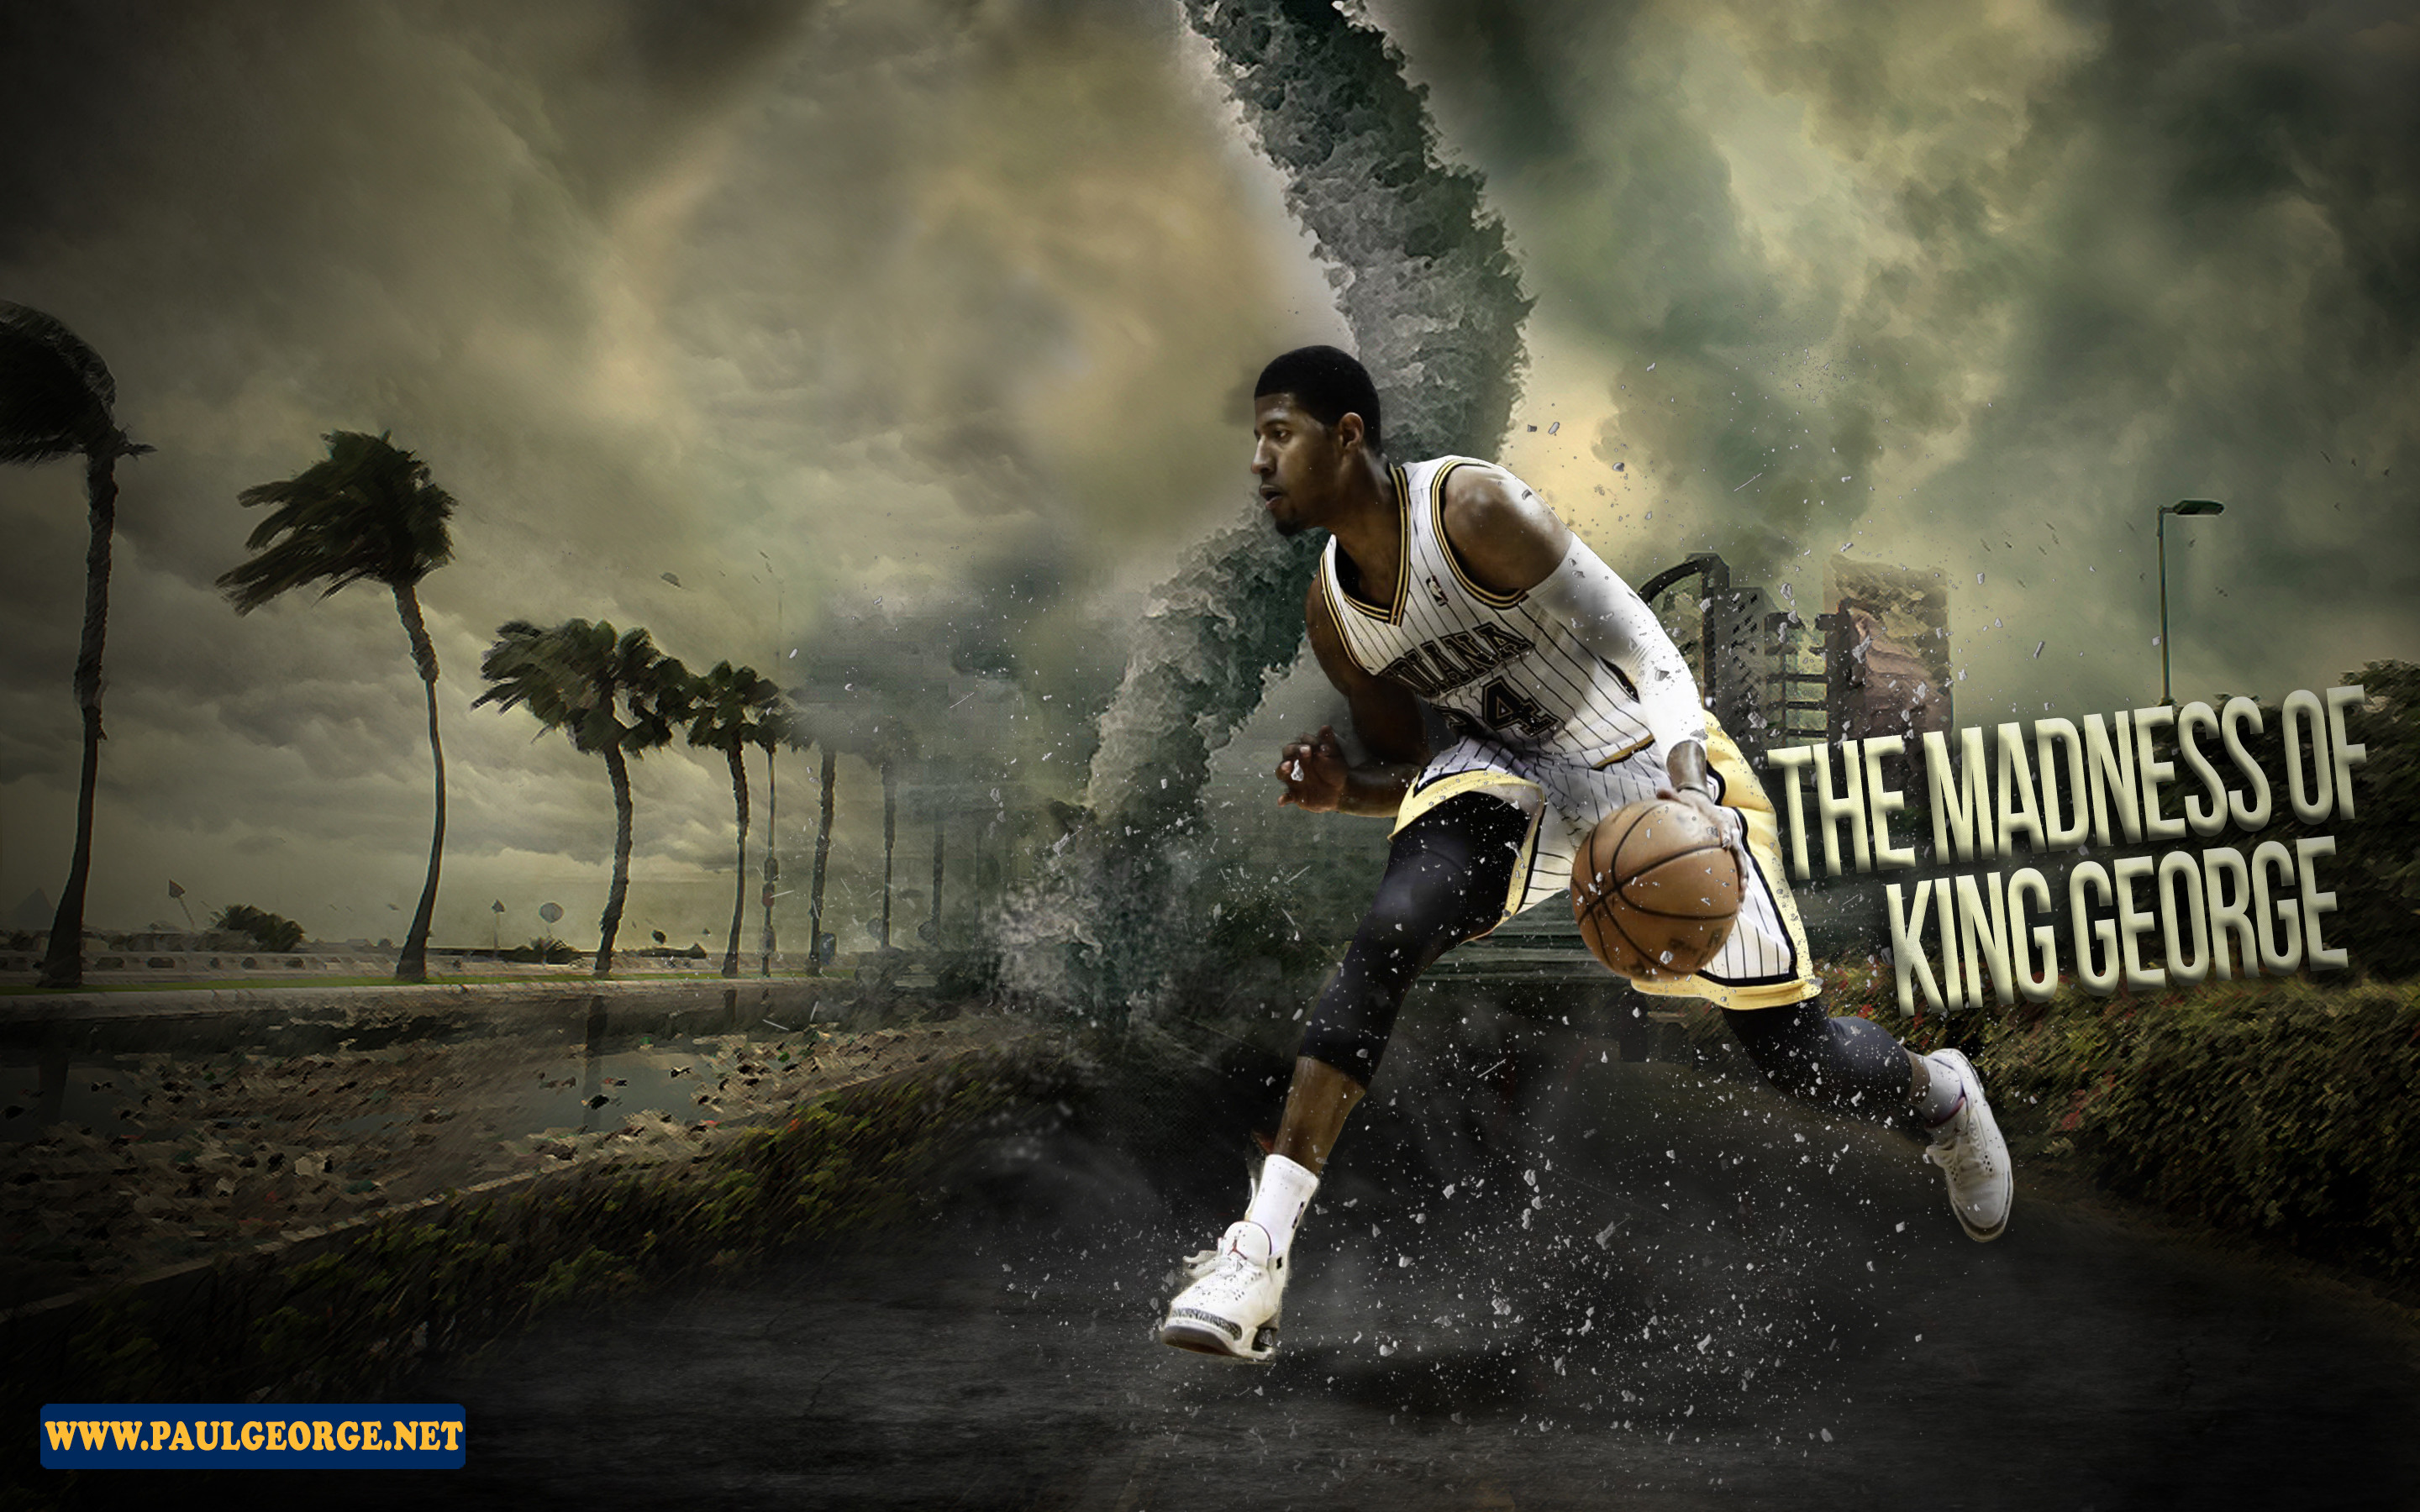 2880x1800 High Resolution Pictures Collection of Paul George Wallpaper